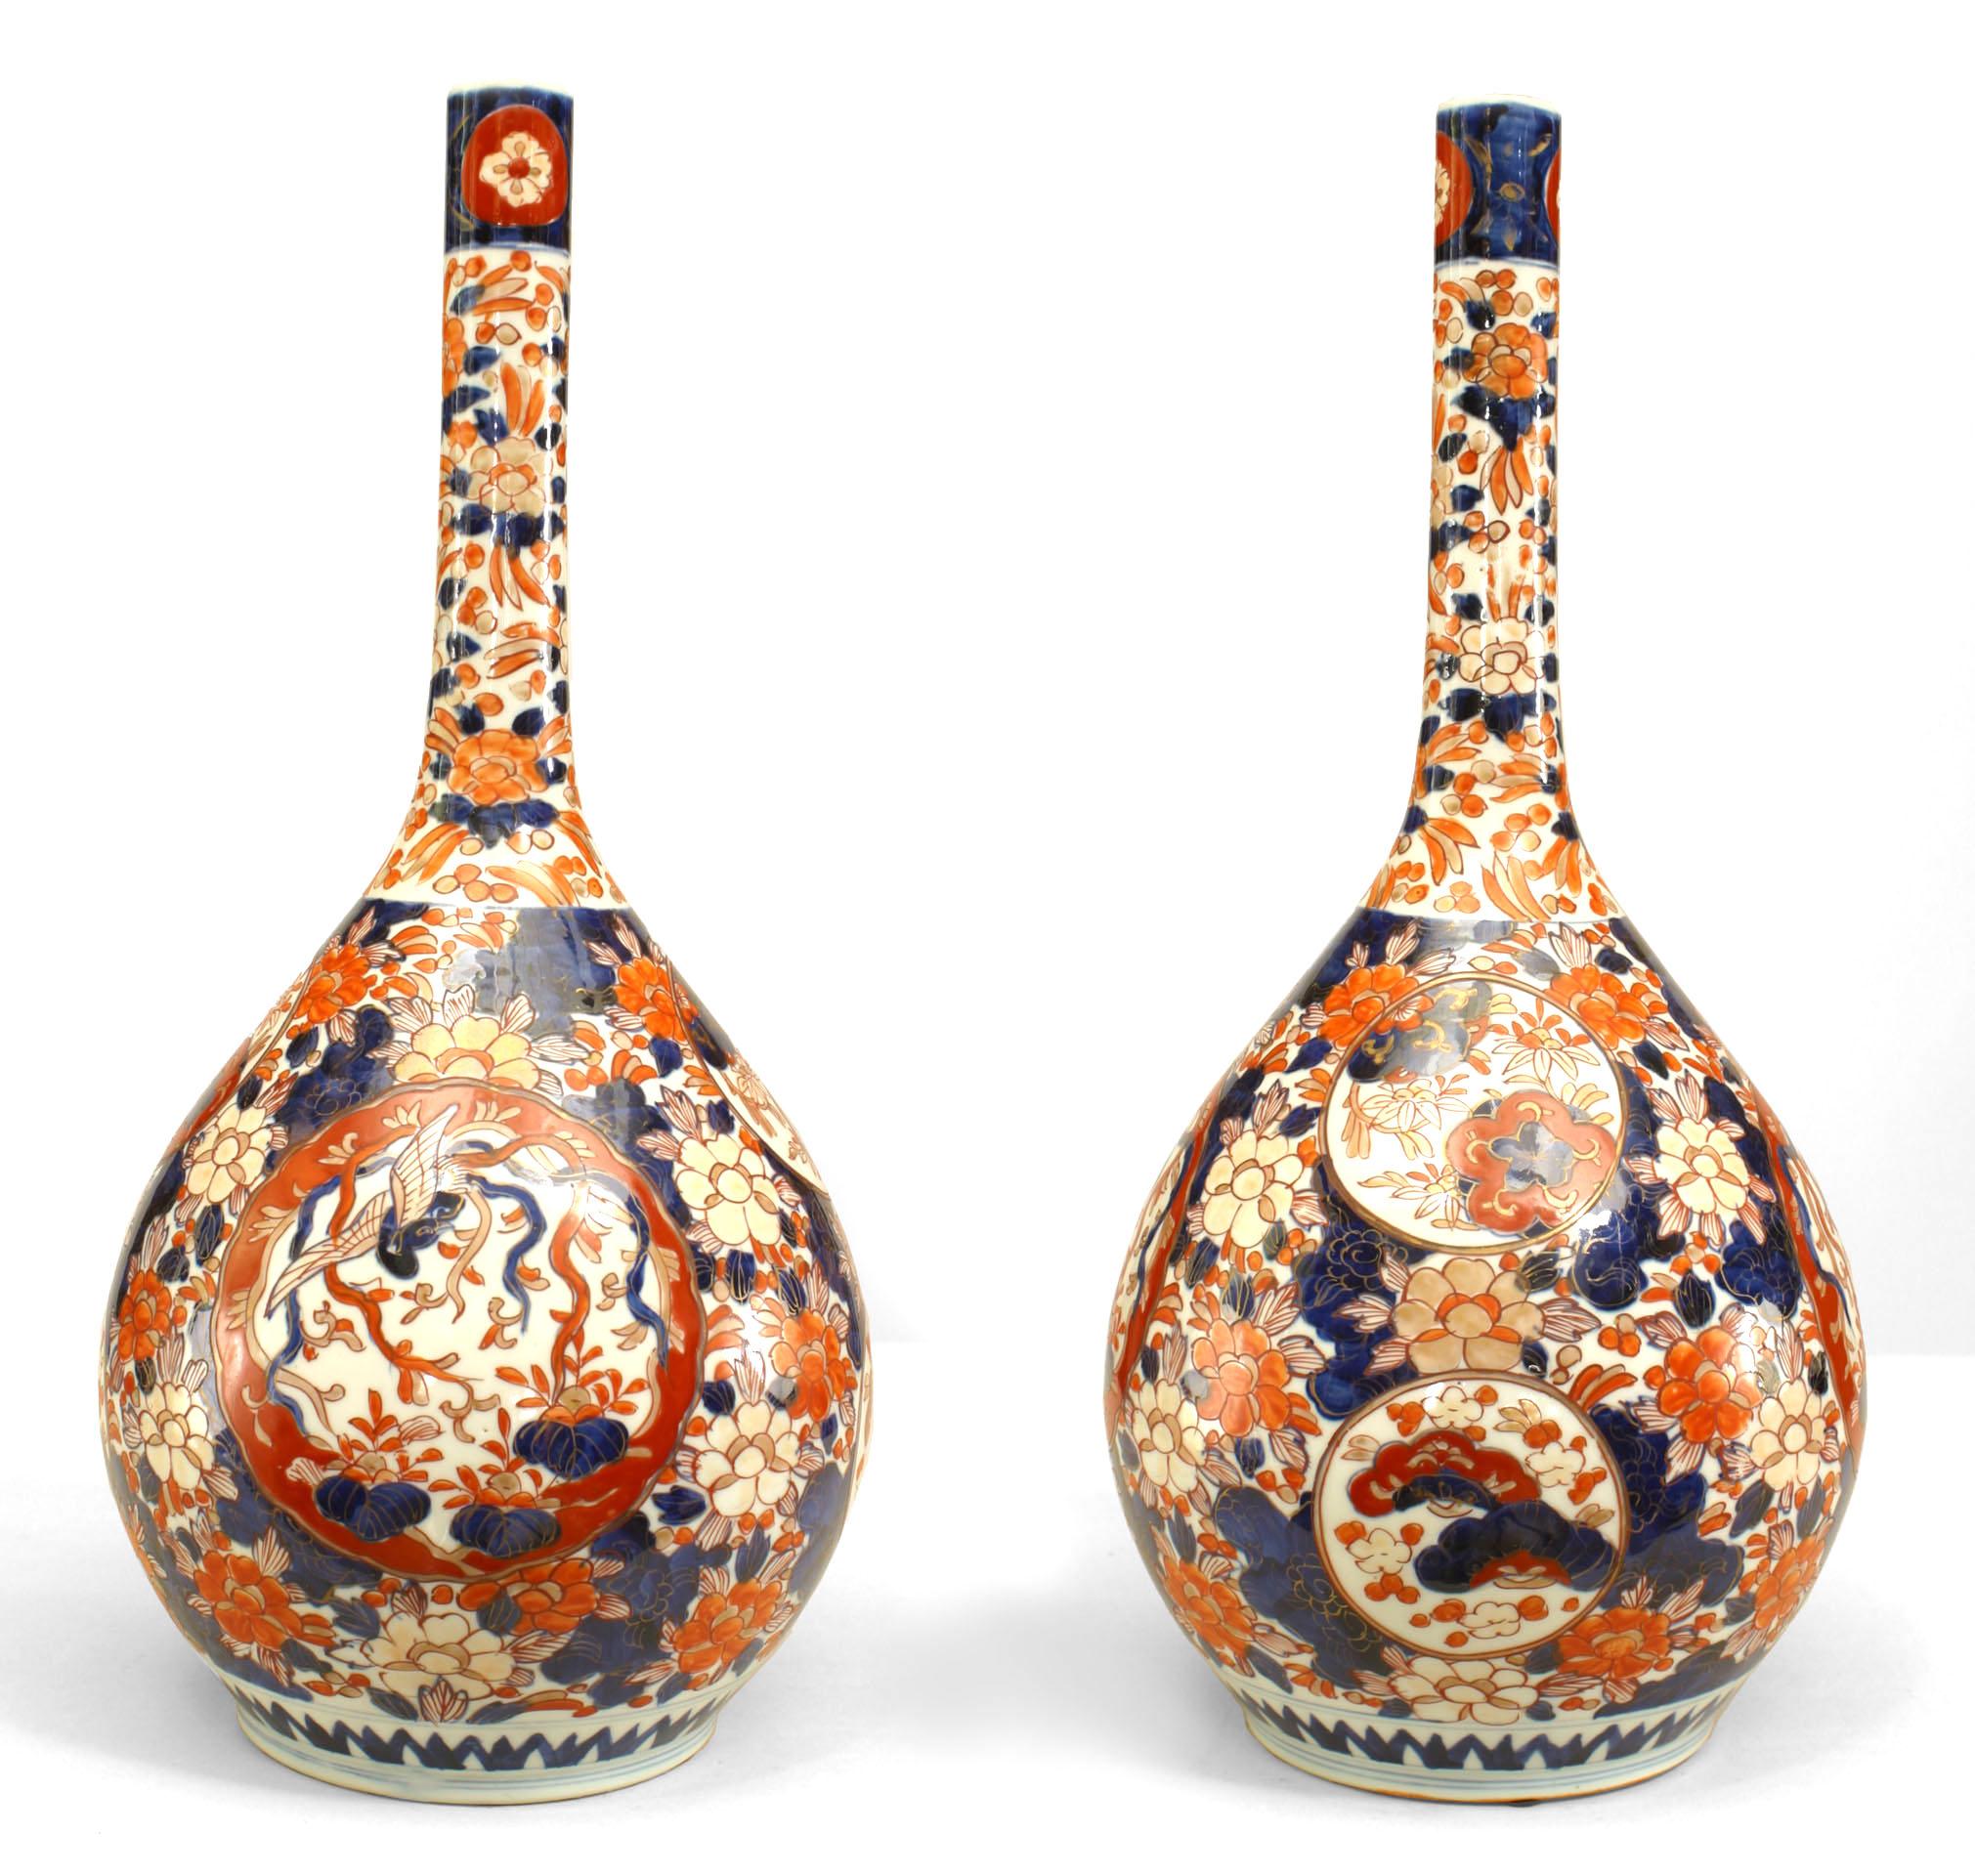 Pair of 19th Century Japanese Imari Porcelain Vases In Good Condition For Sale In New York, NY